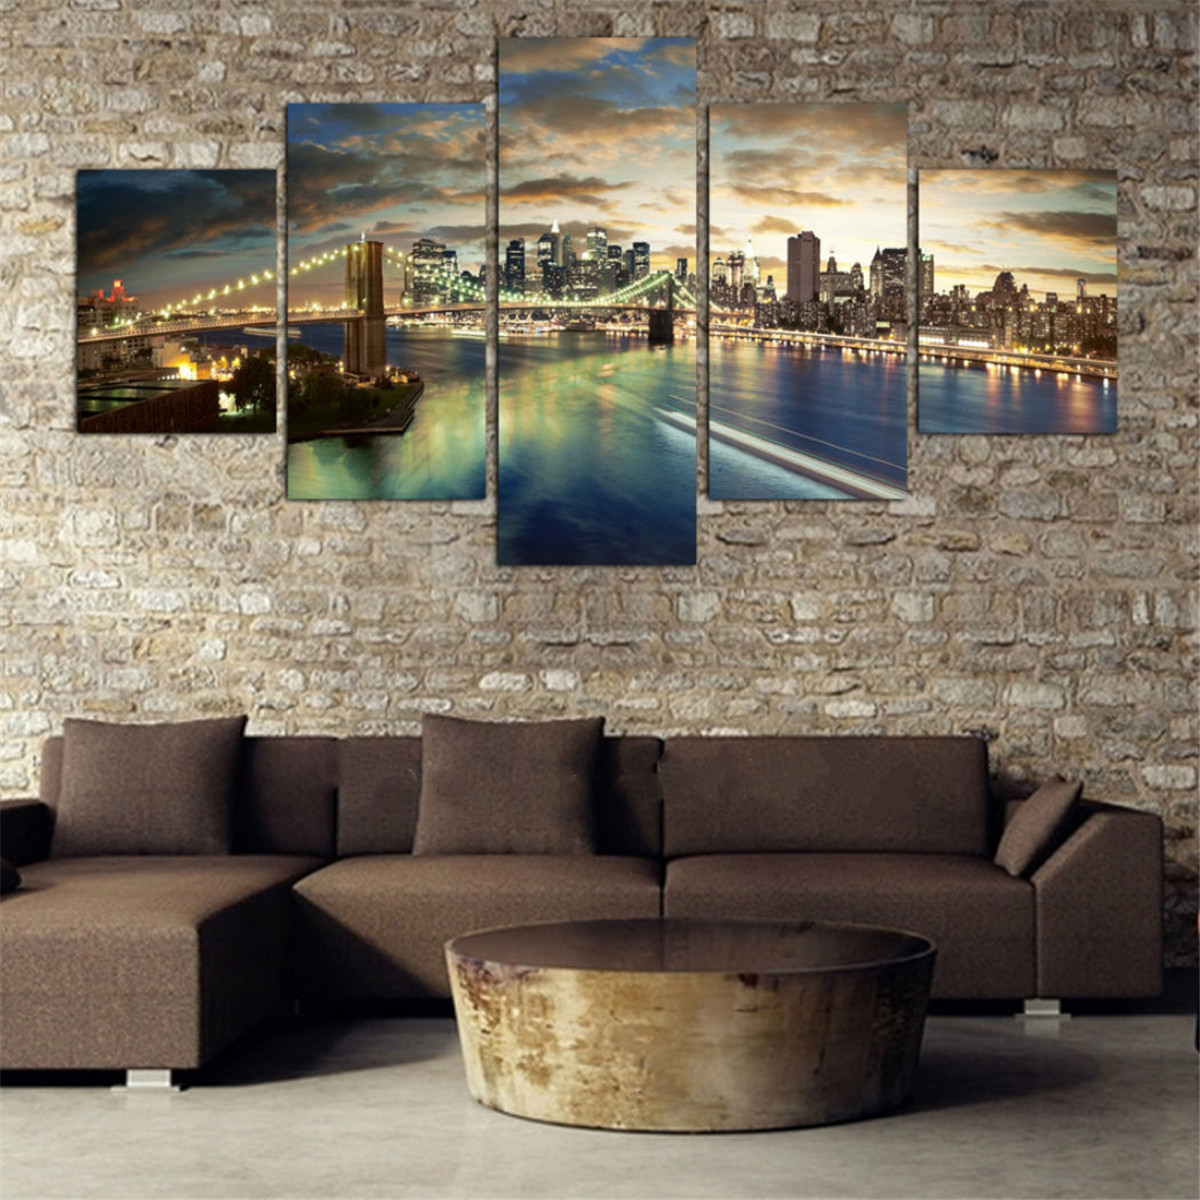 5-Pcs-Wall-Decorative-Painting-New-York-City-at-Night-Wall-Decor-Art-Pictures-Canvas-Prints-Home-Off-1724152-5